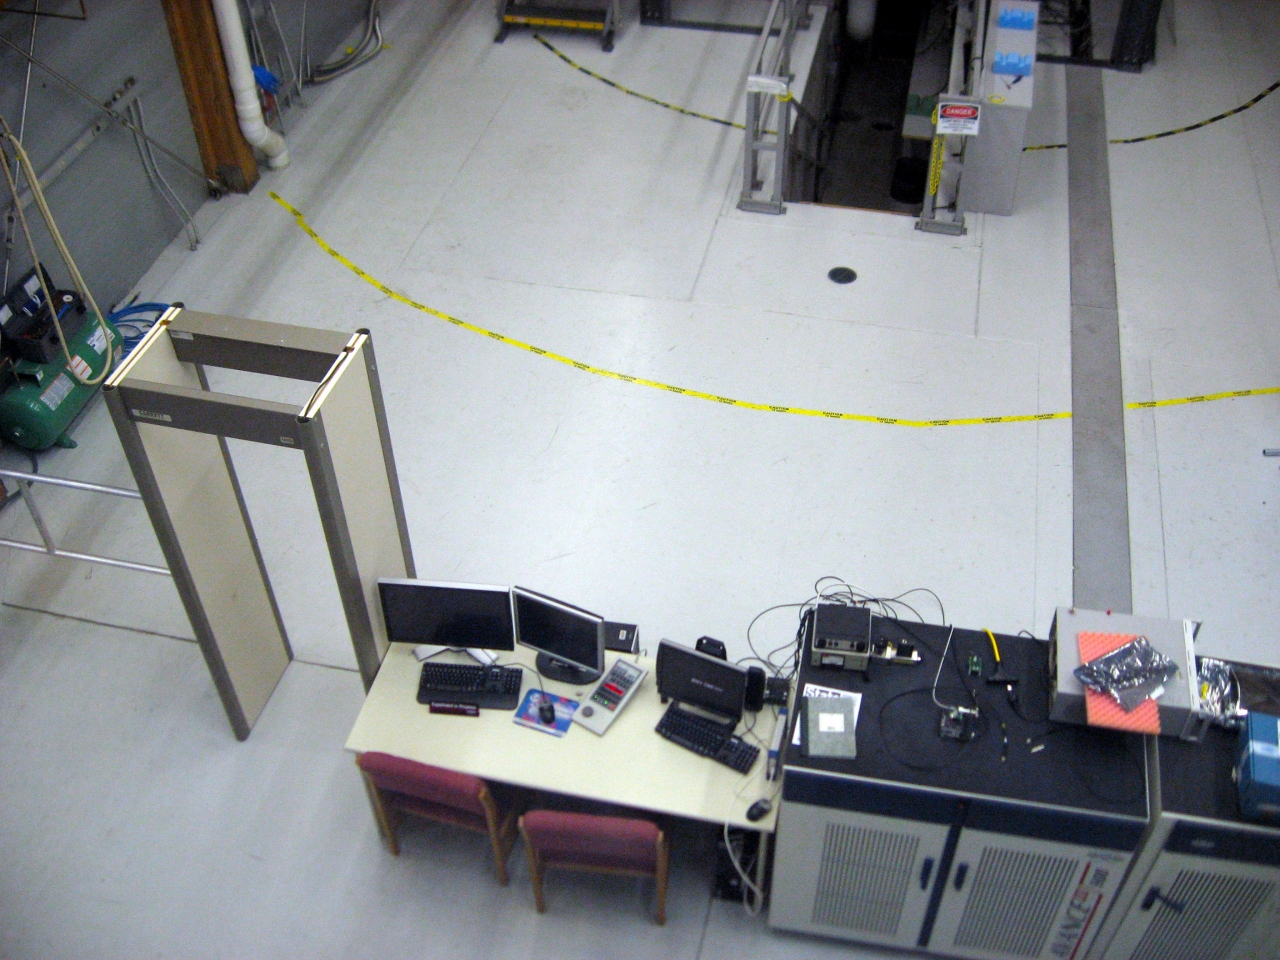 Metal detector and control consoles for the 900 MHz Nuclear Magnetic Resonance magnet.